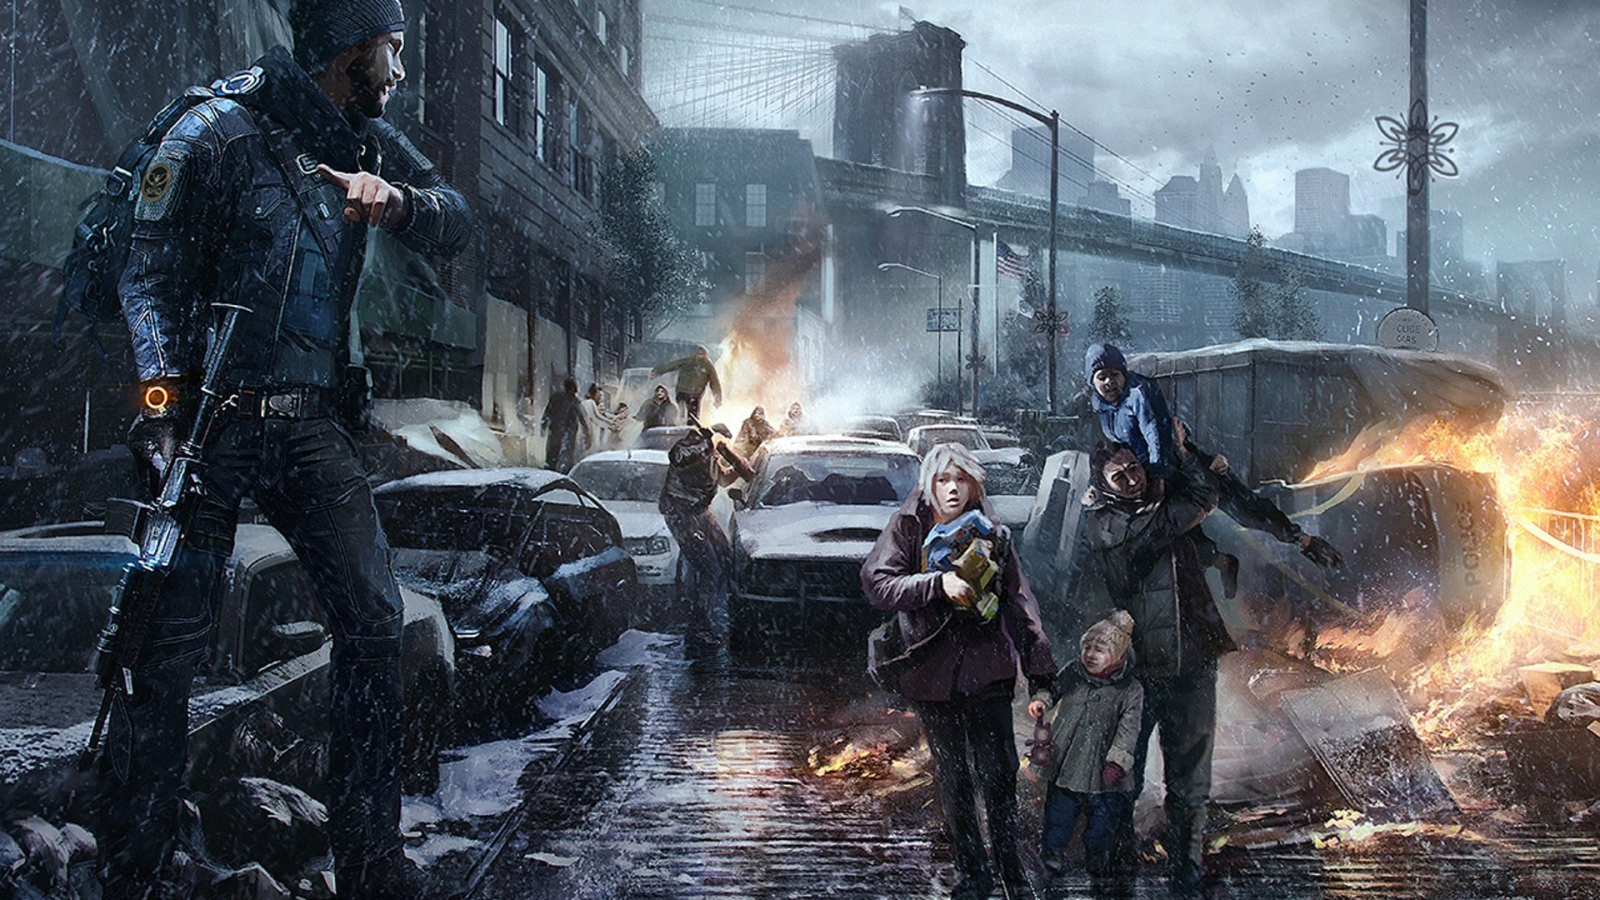 Tom Clancy The Division Fan Art for 1600 x 900 HDTV resolution